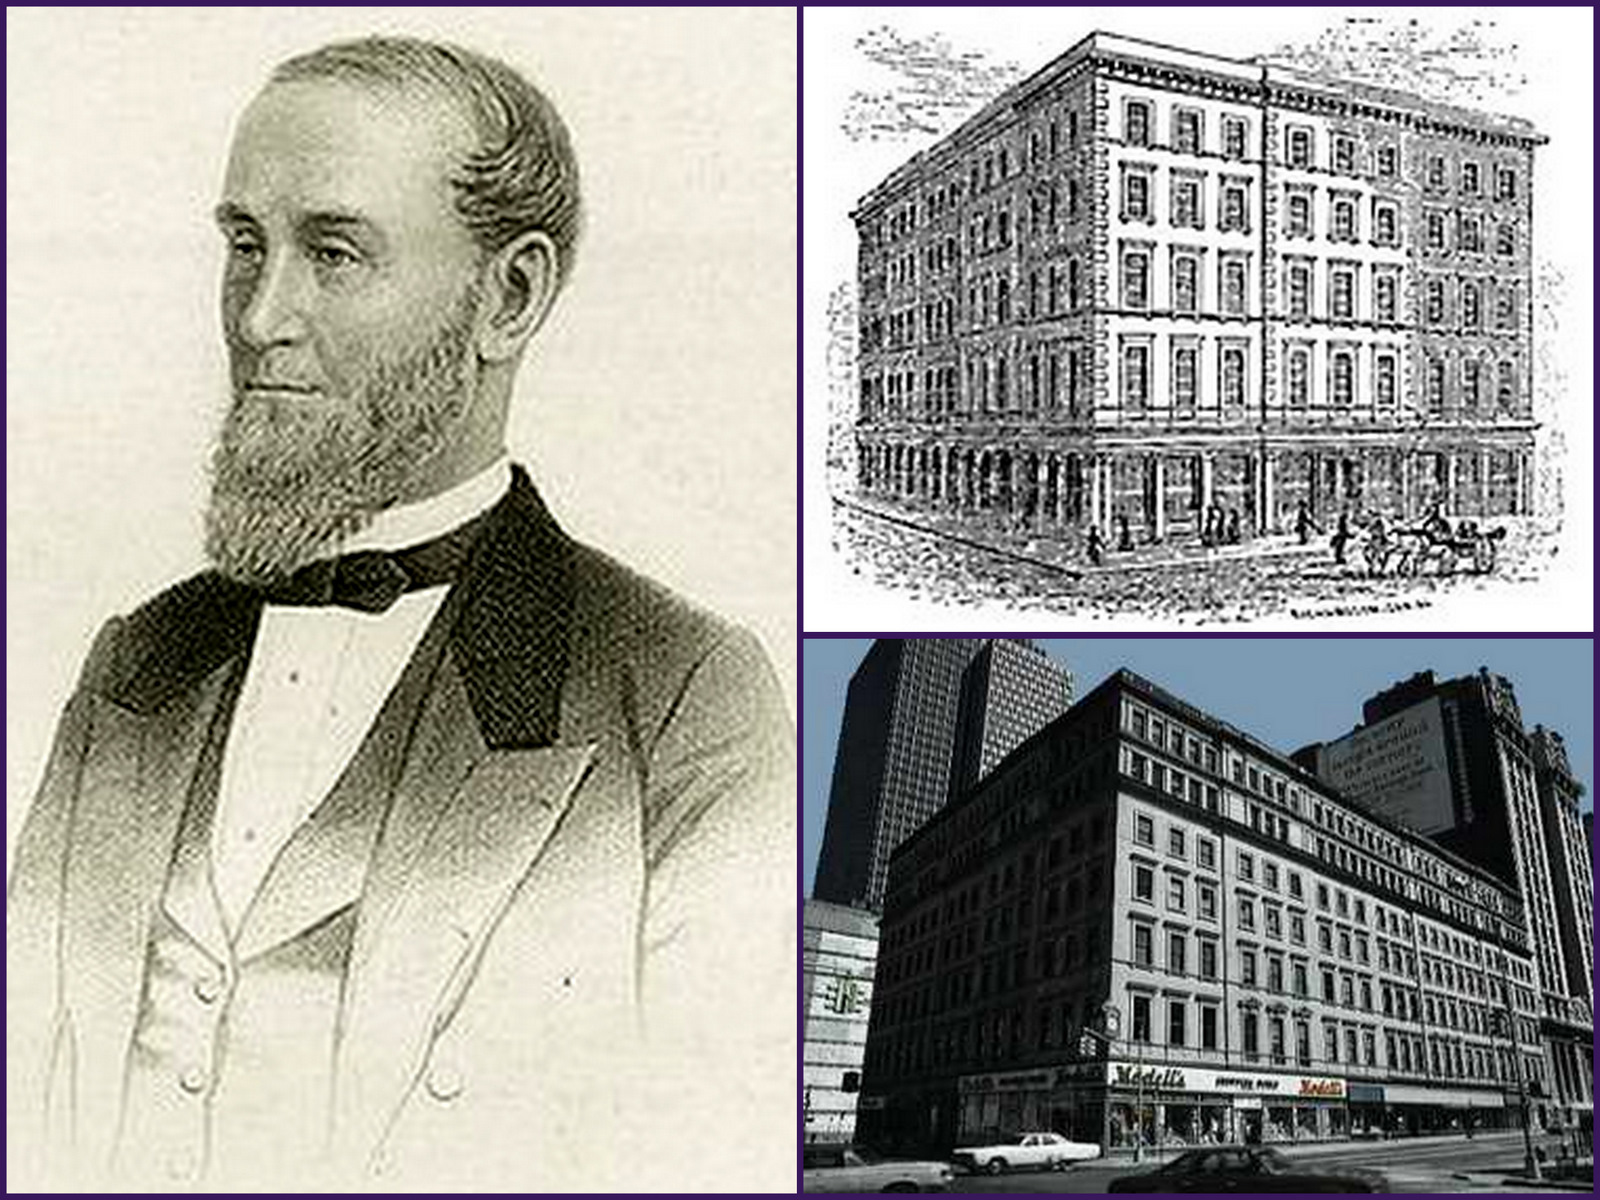 in 1858 rowland hussey macy founded dry goods store macy